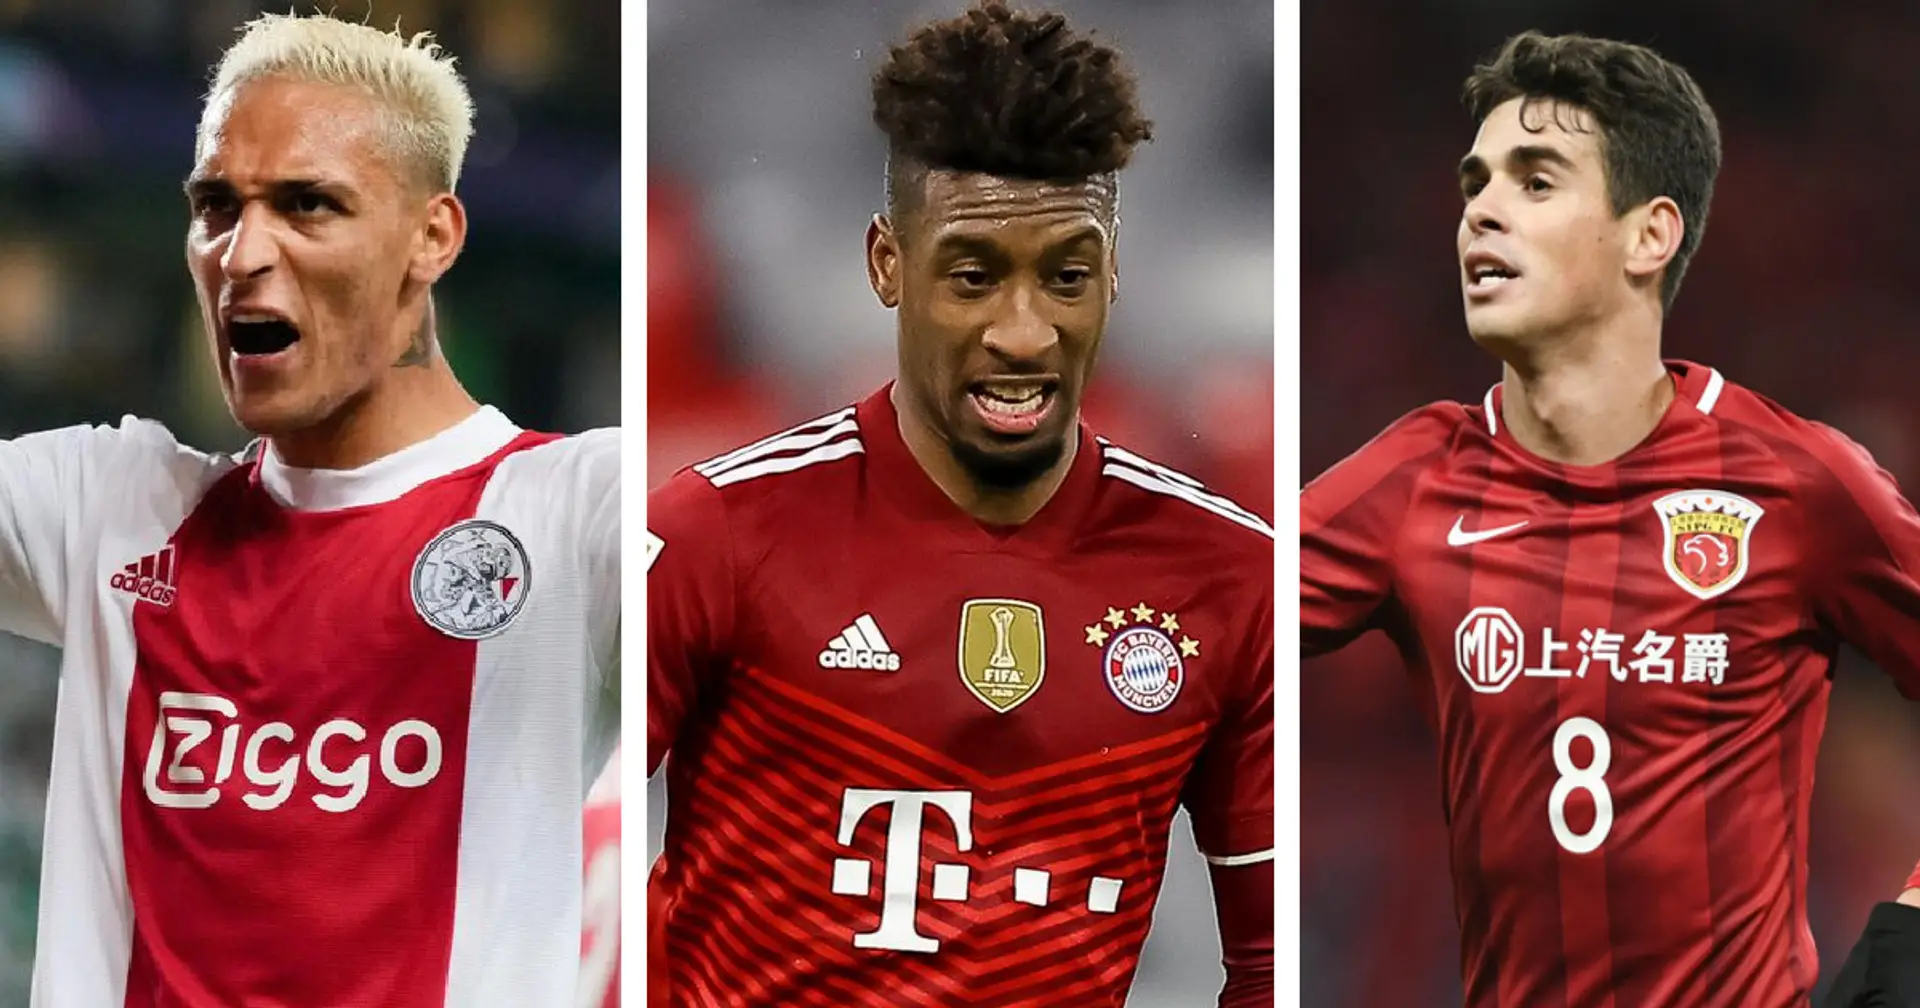 Antony, Oscar, Coman and 13 more names: Ranking the probability of latest rumours at Barca